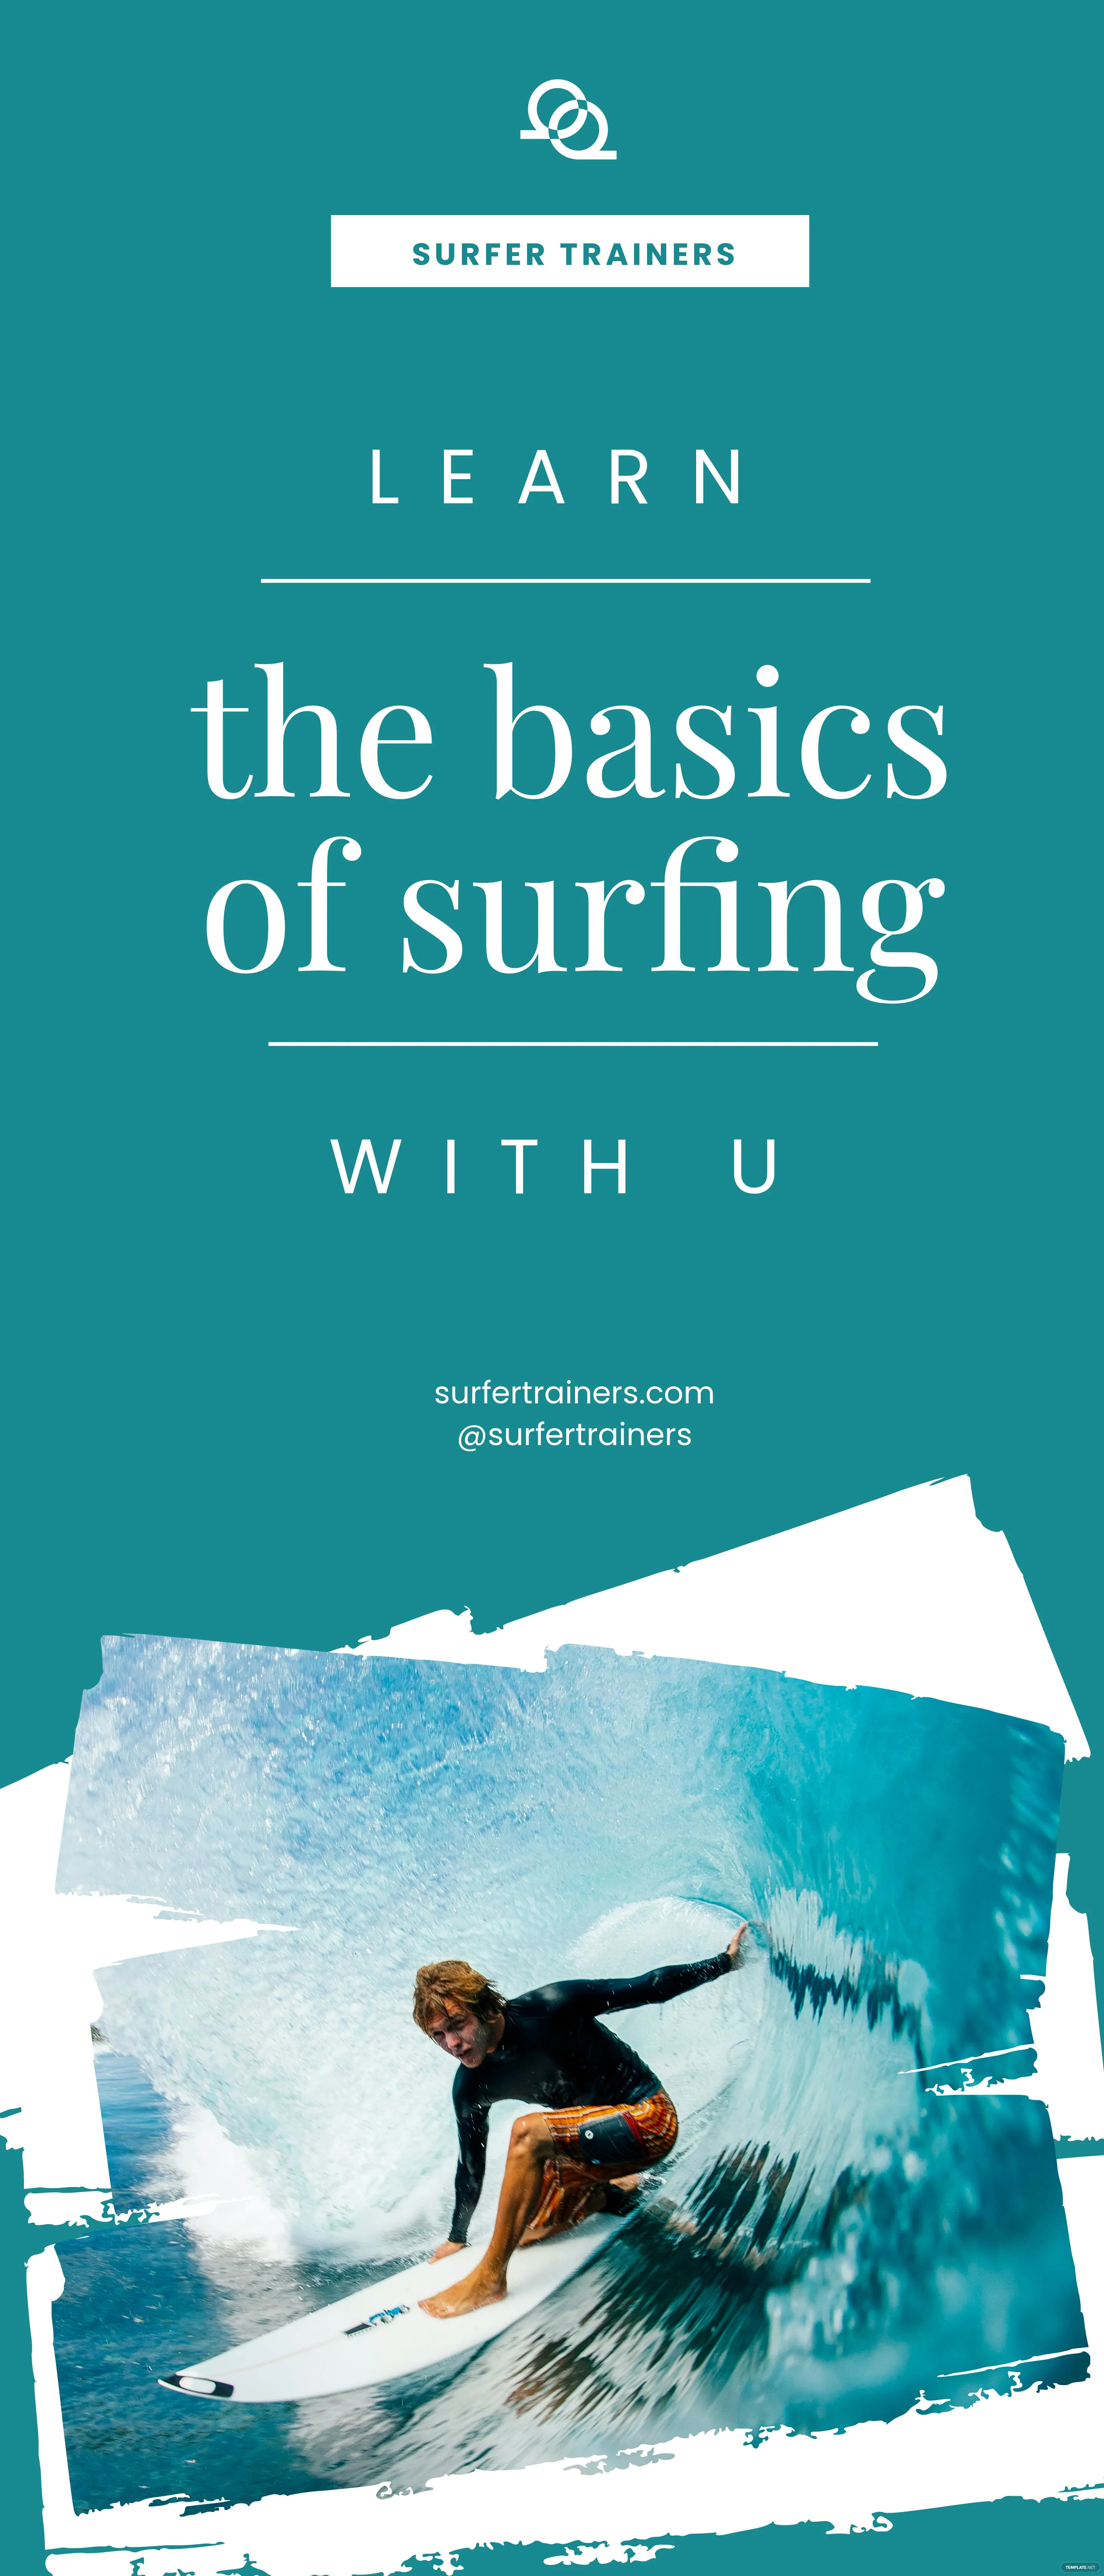 surf training roll up banner template